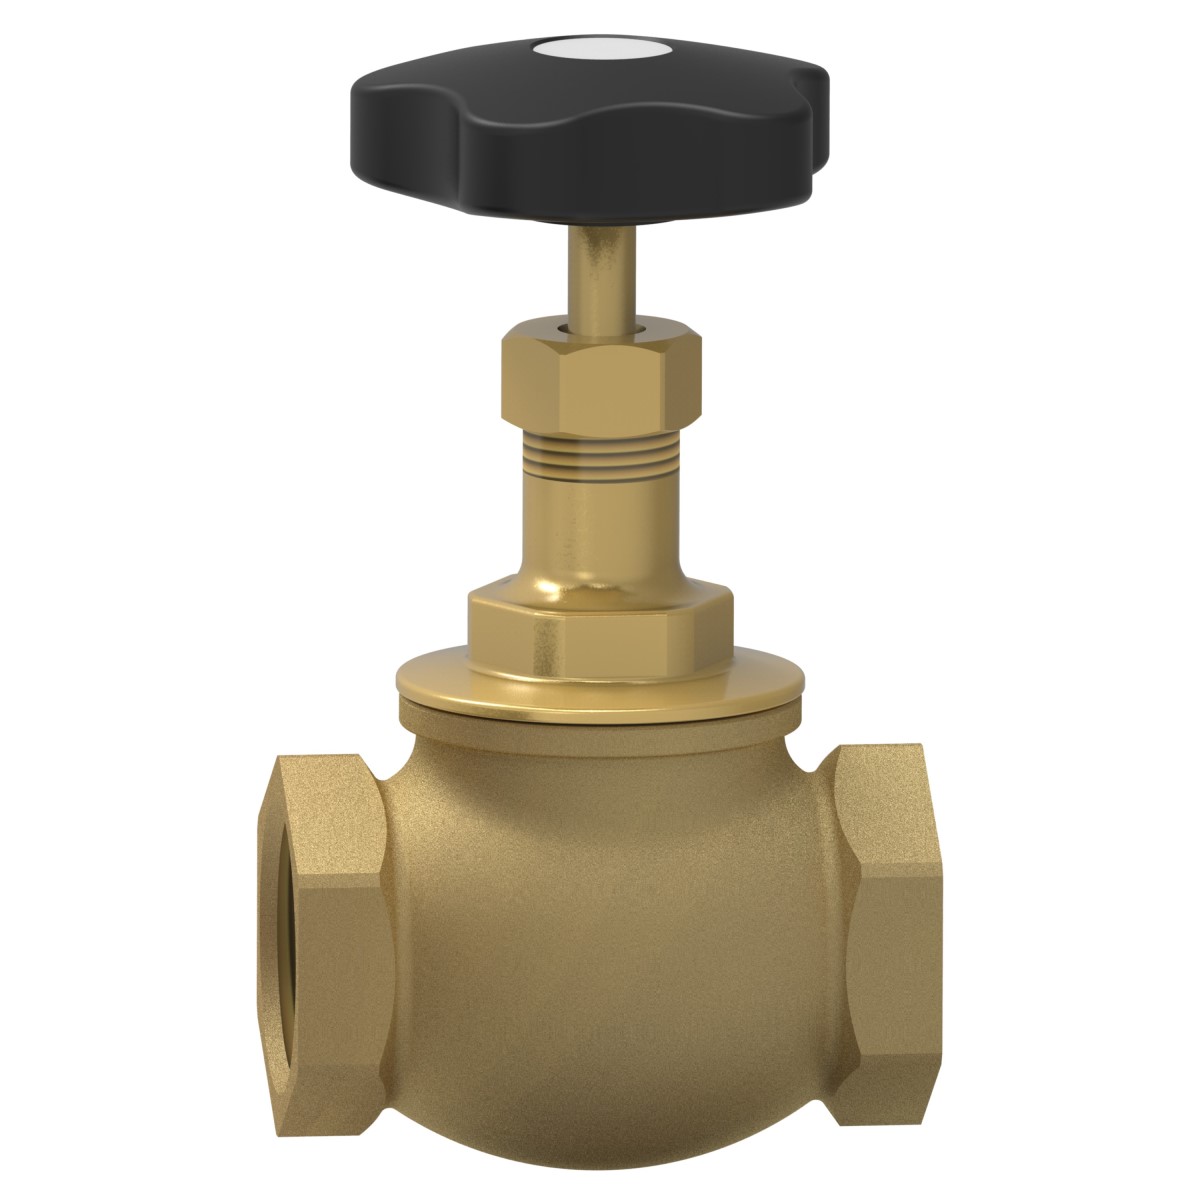 Safety valve with straight connector